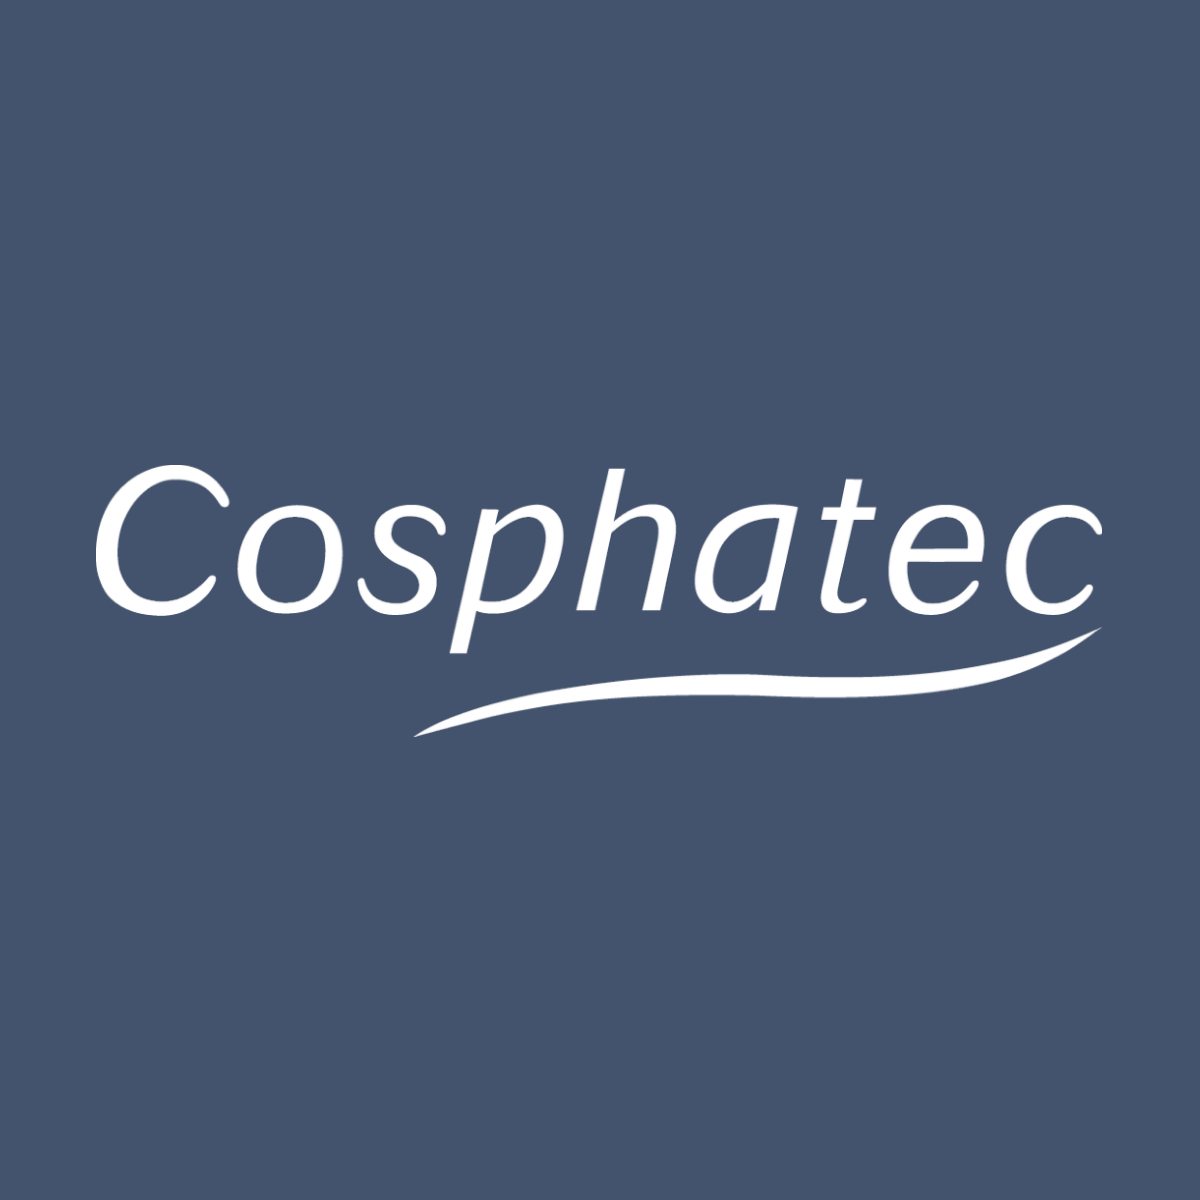 Cosphatec 1200x1200 px